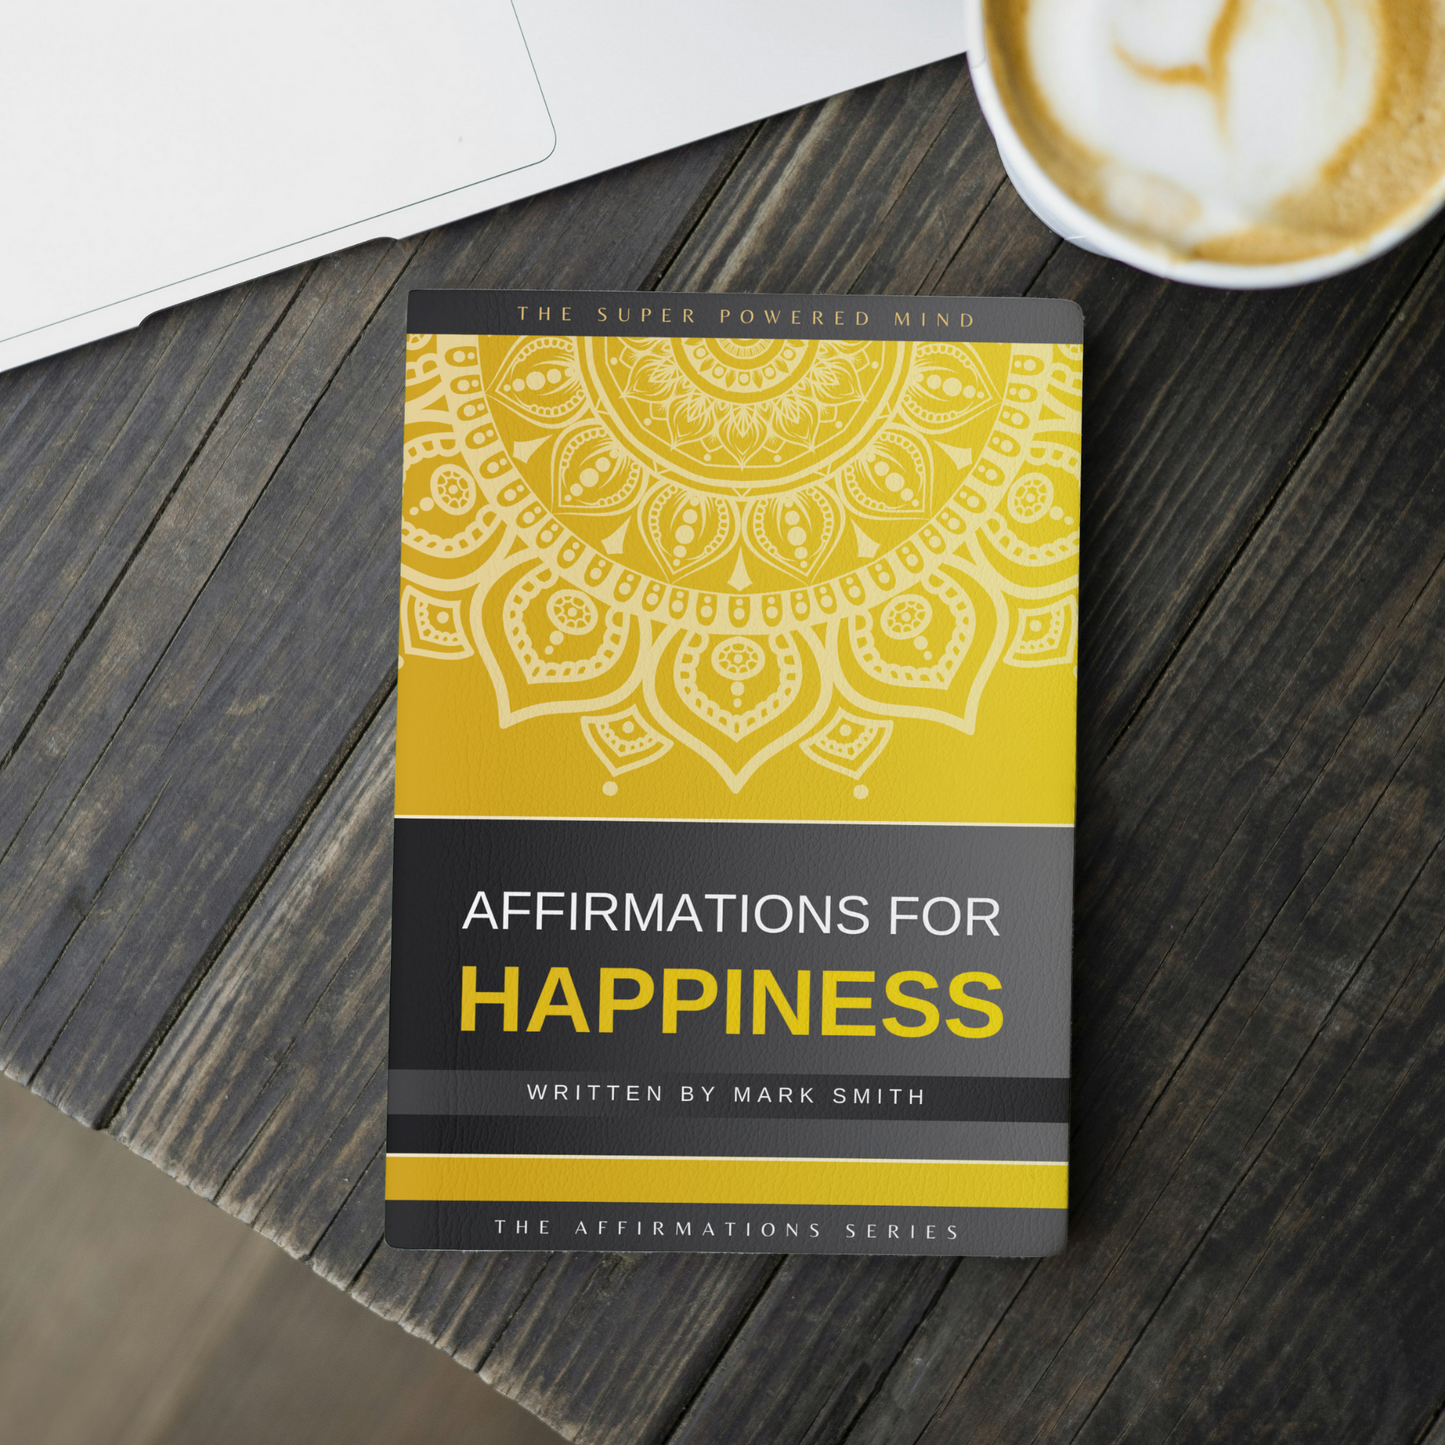 Affirmations for Happiness (The Affirmations Series) - Written by Mark Smith (Digital Download eBook)